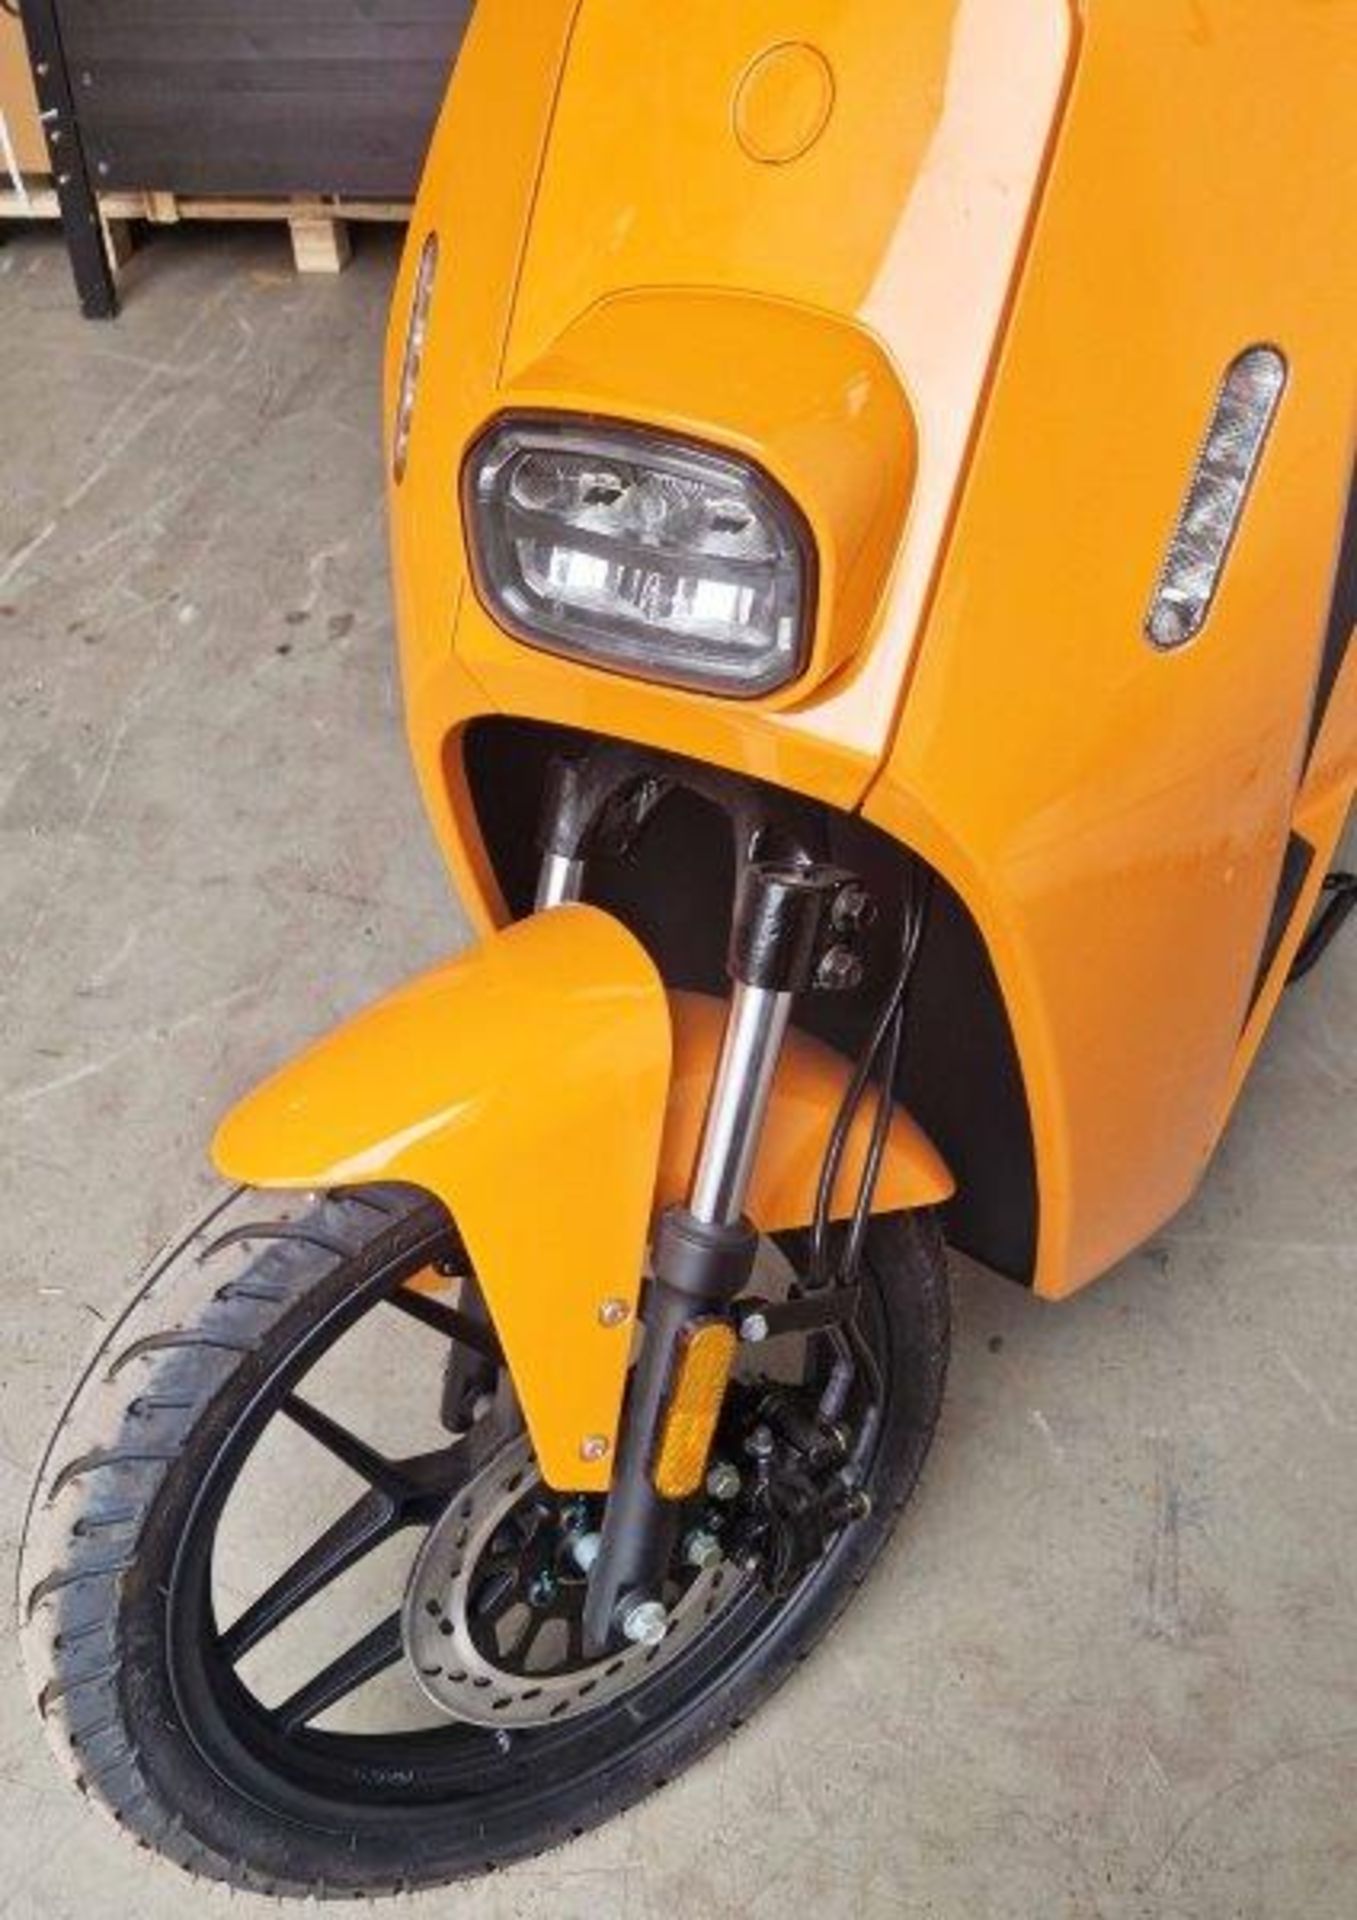 VMOTO VS2 L1e-b Electric Moped in Orange. Boxed, Unused and Unregistered, requiring some assembly, - Image 4 of 11